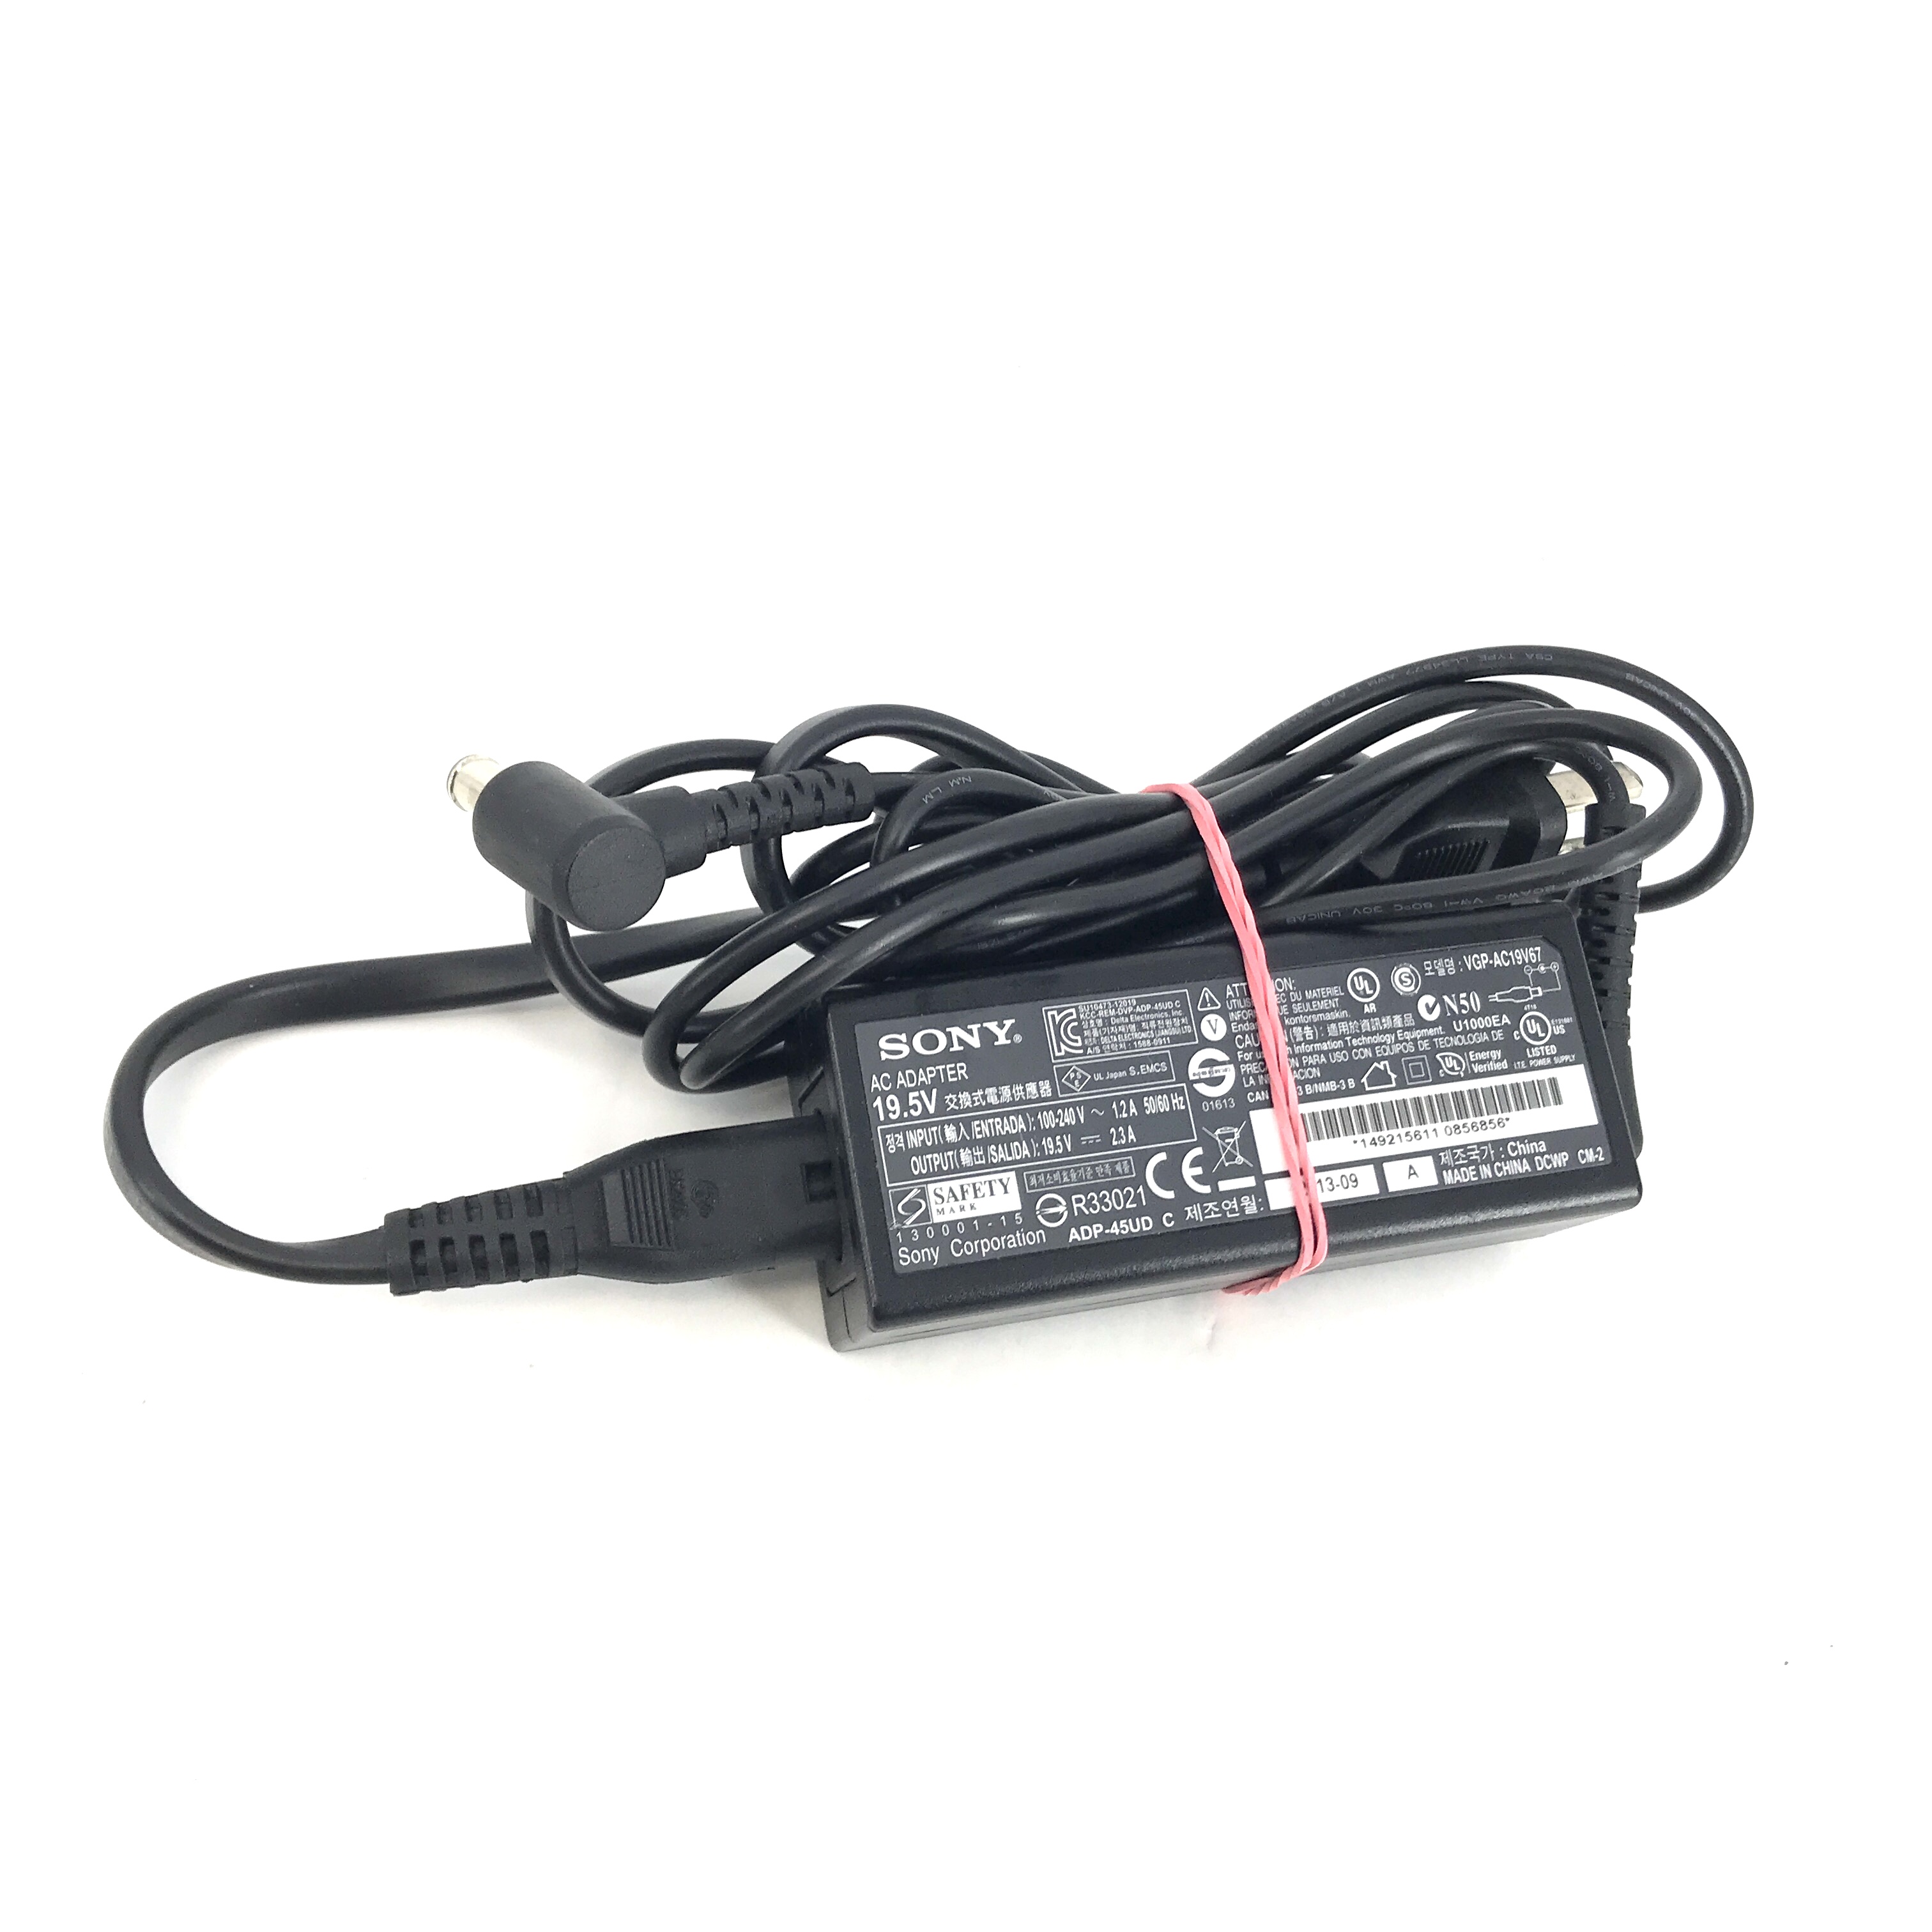 Sony AC Adapter Power Charger for Sony VAIO VGP-AC19V67 Laptop 19.5V 45W